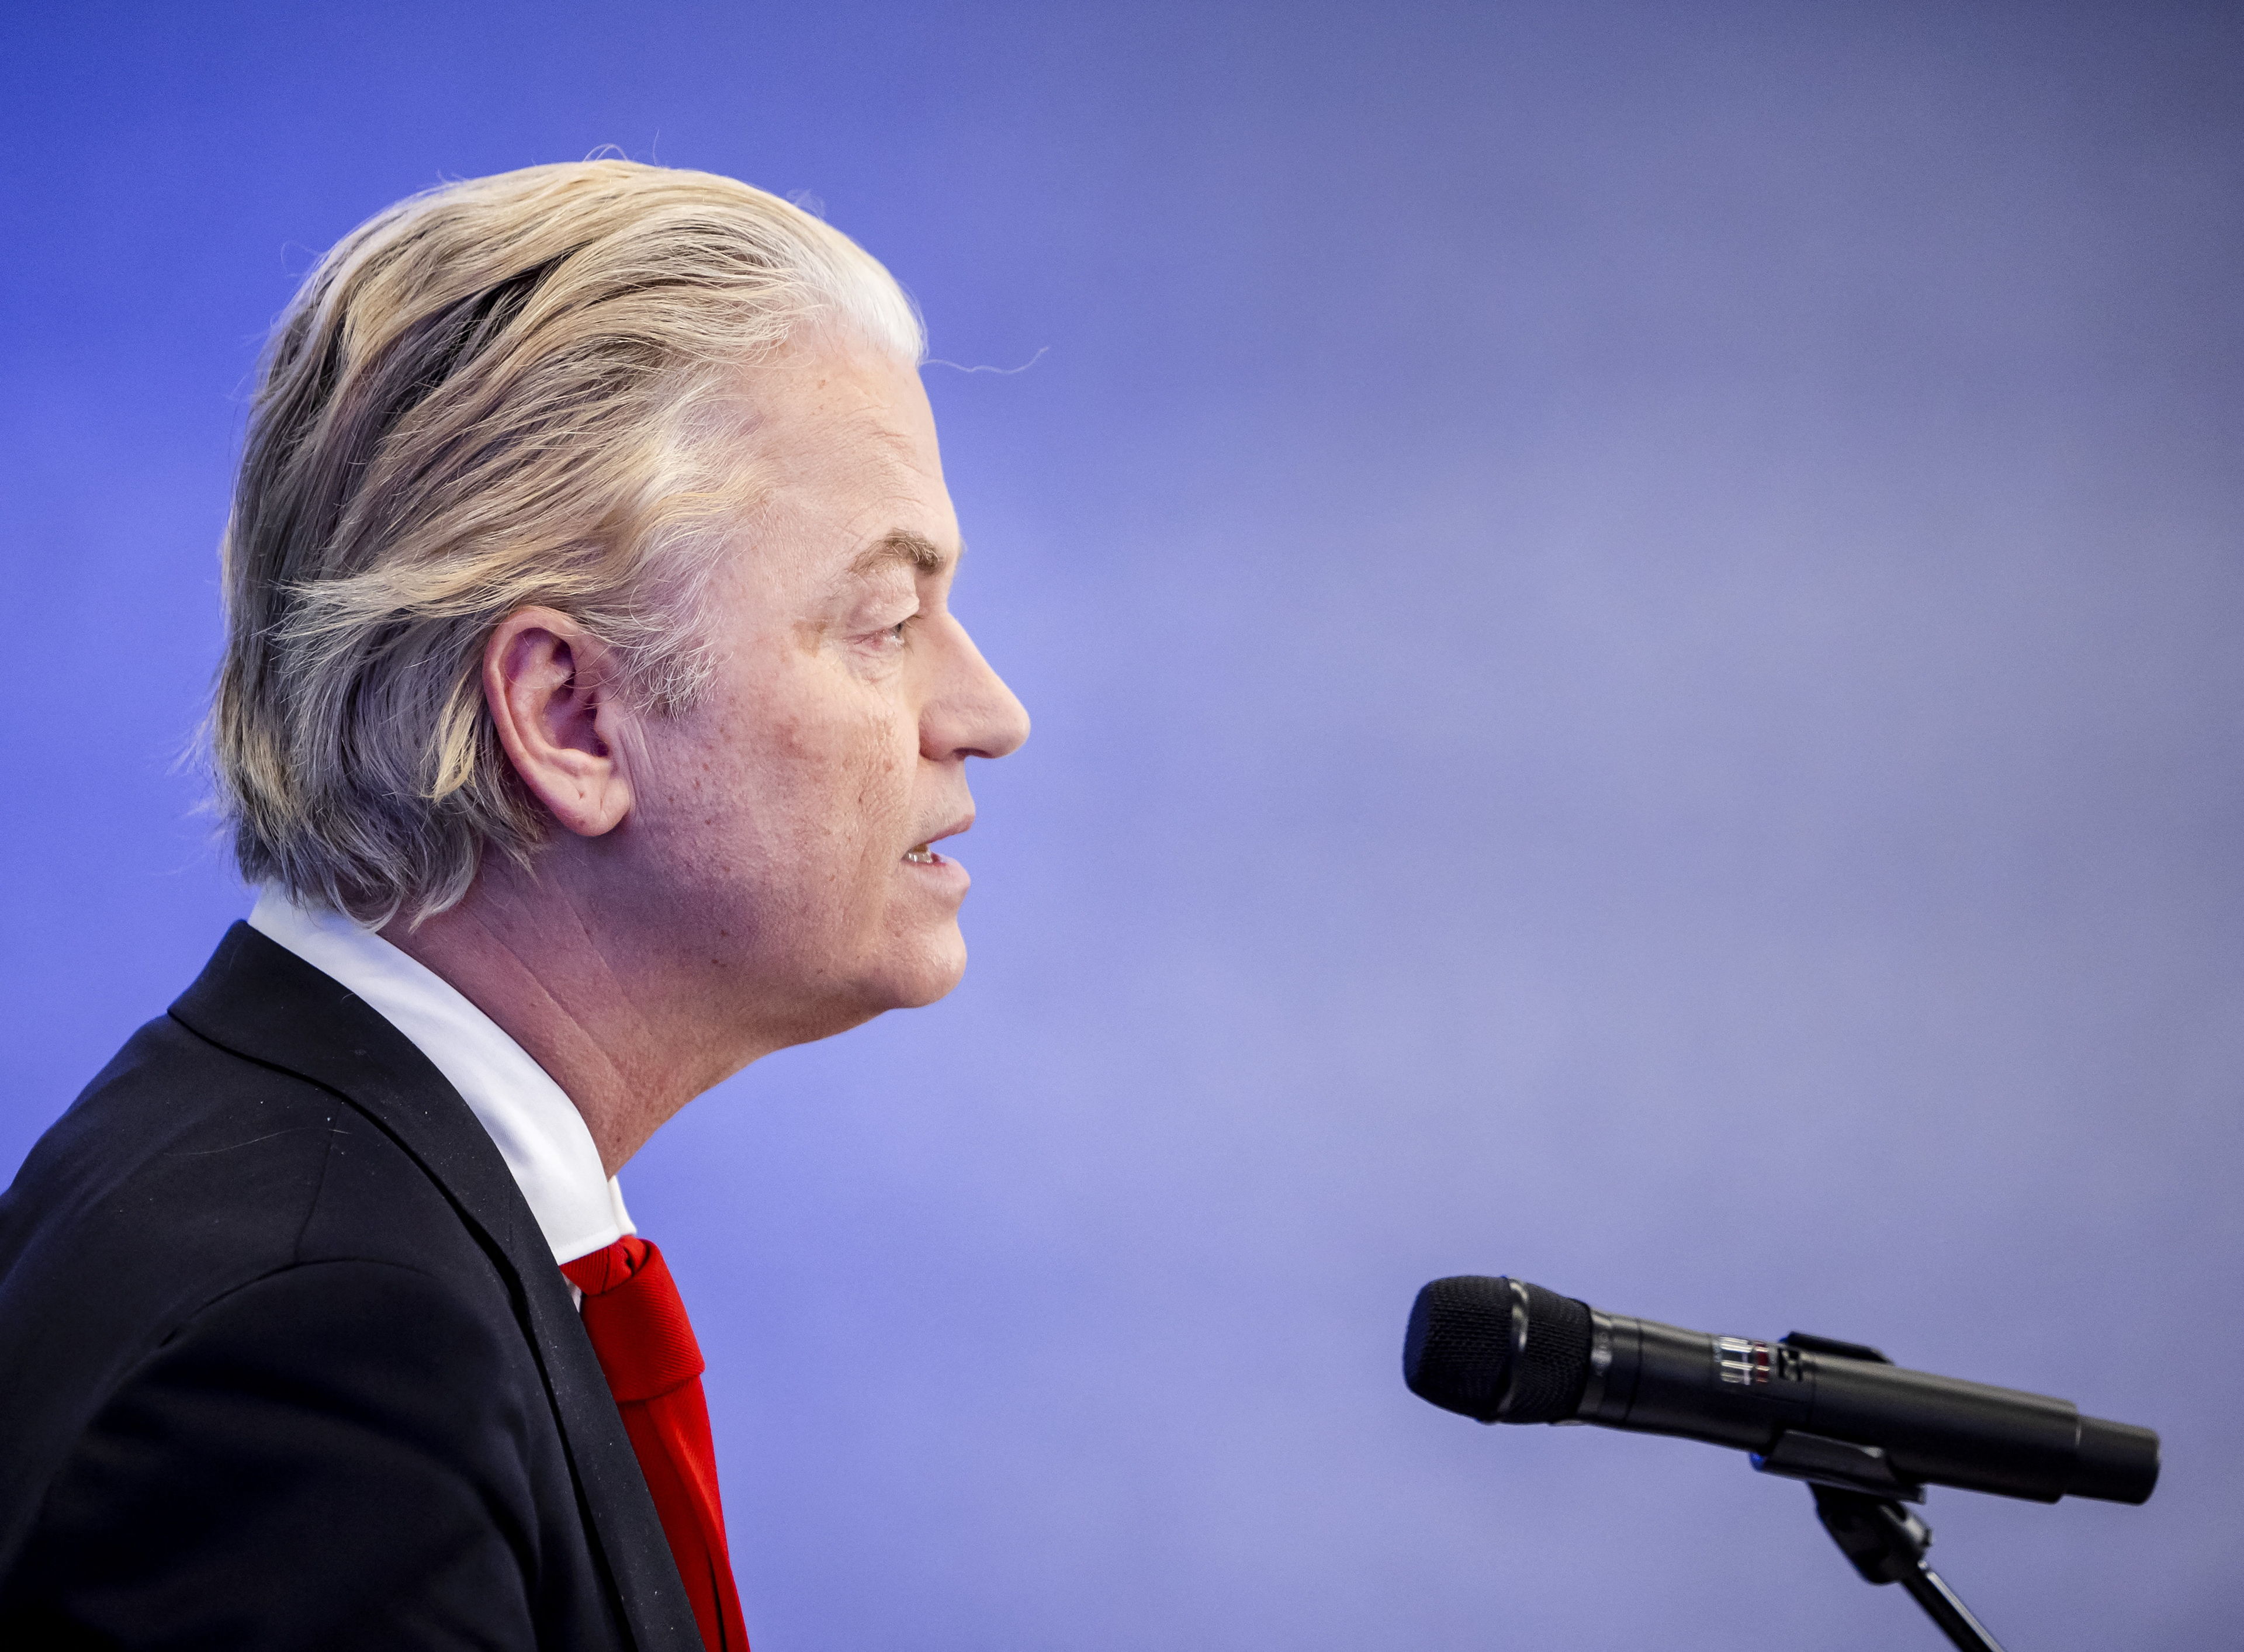 Dutch coalition agreement focuses on agriculture, security and stricter migration policy